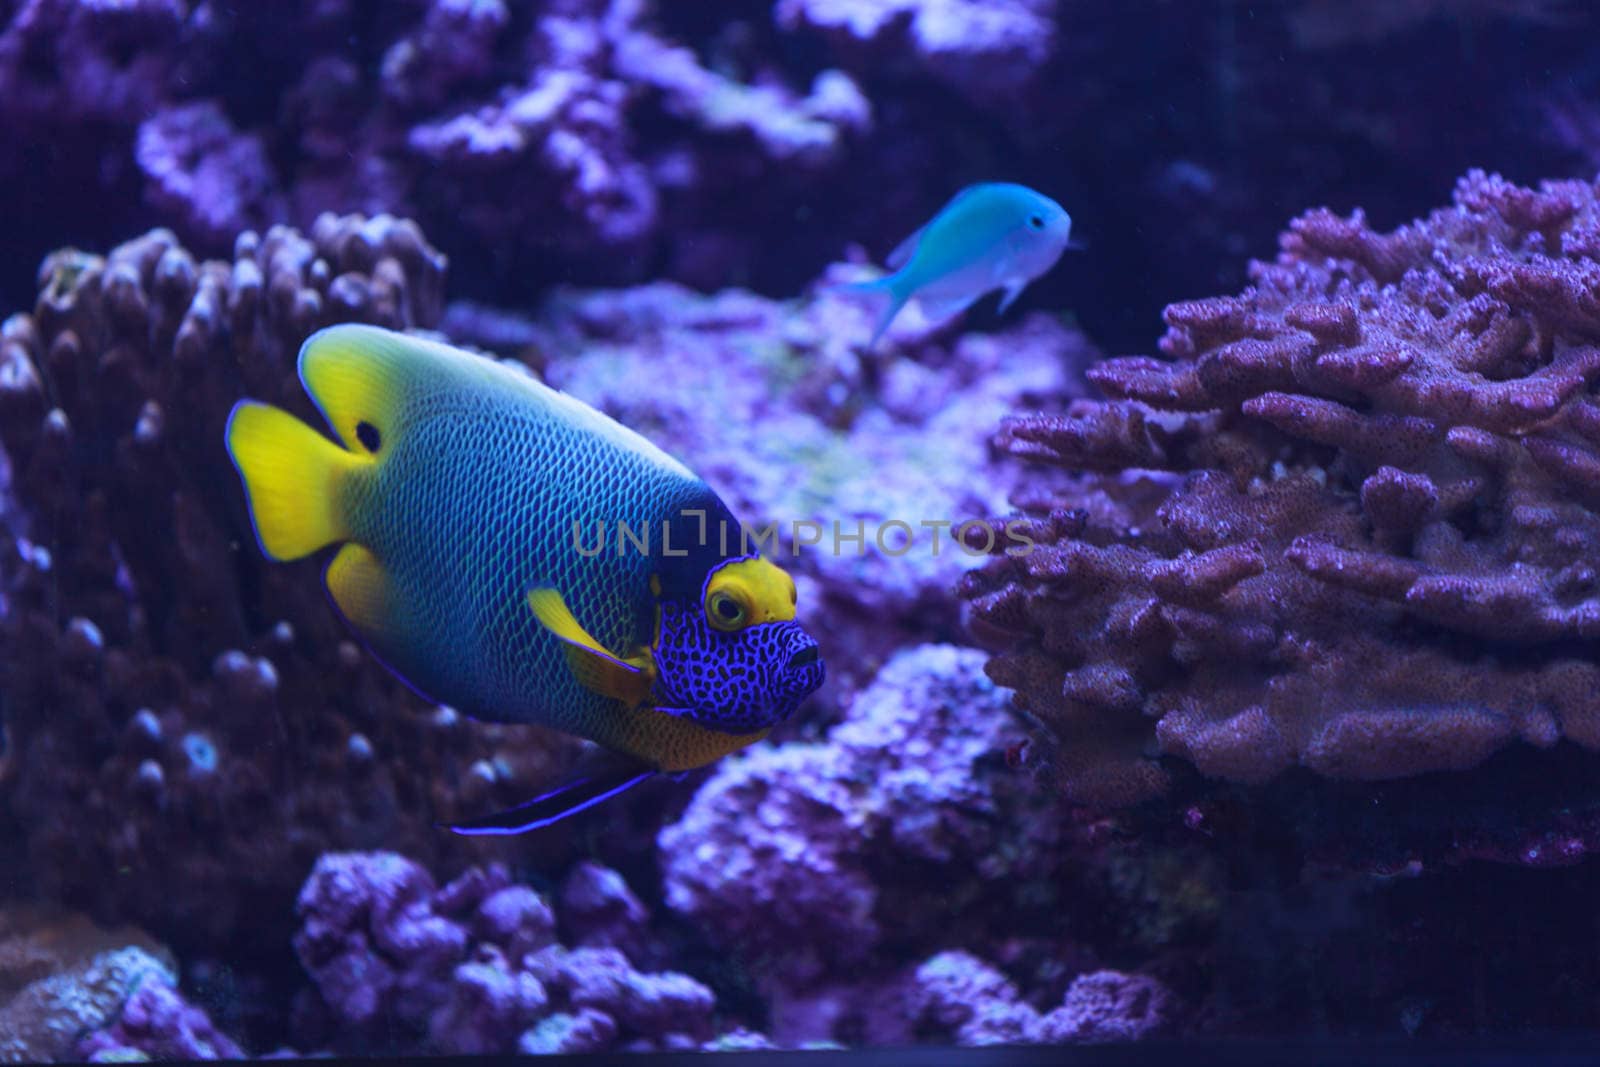 Bluefaced angelfish, Pomacanthus xanthometopon, can be found along the tropical reef in the ocean.